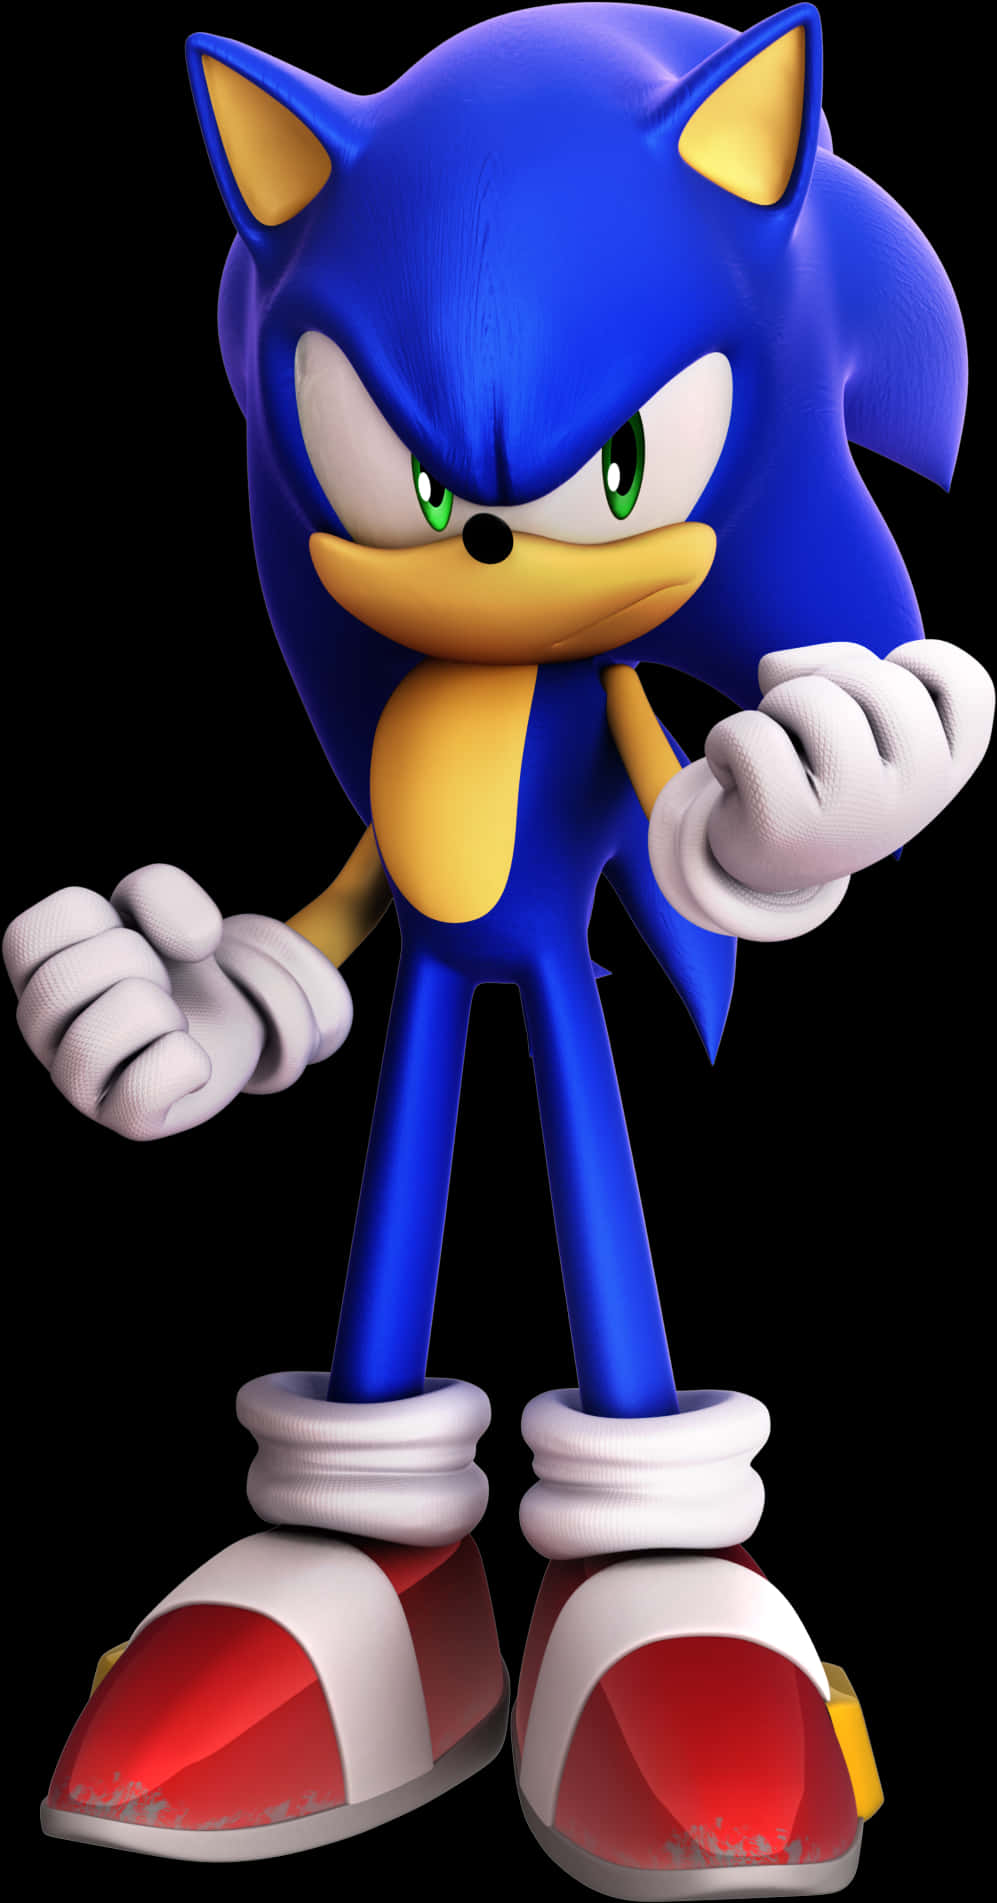 Sonicthe Hedgehog Standing Pose PNG image